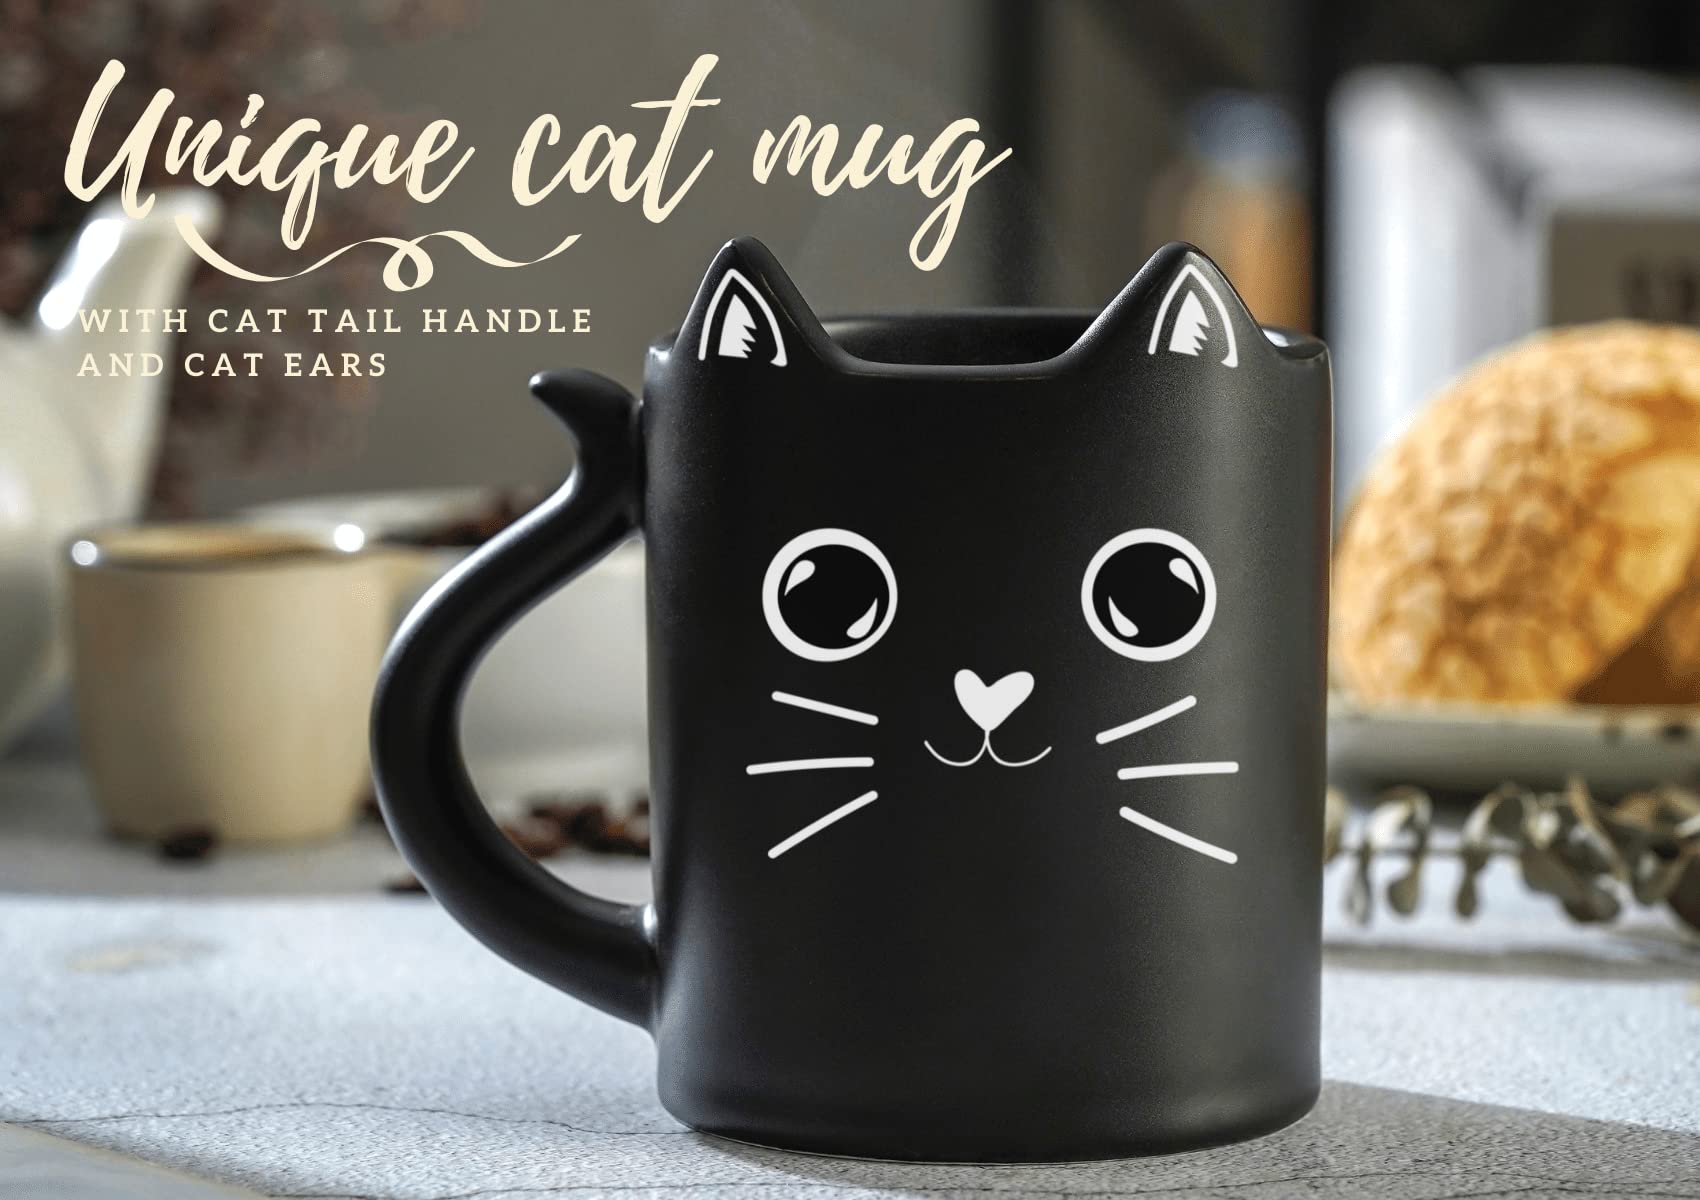 Onebttl Funny Cat Coffee Mug, Cat Mug with Cat Ears and Cat Tail Handle, Cat Gifts for Cat Lovers on Christmas, Birthday - Best Cat Mom Ever